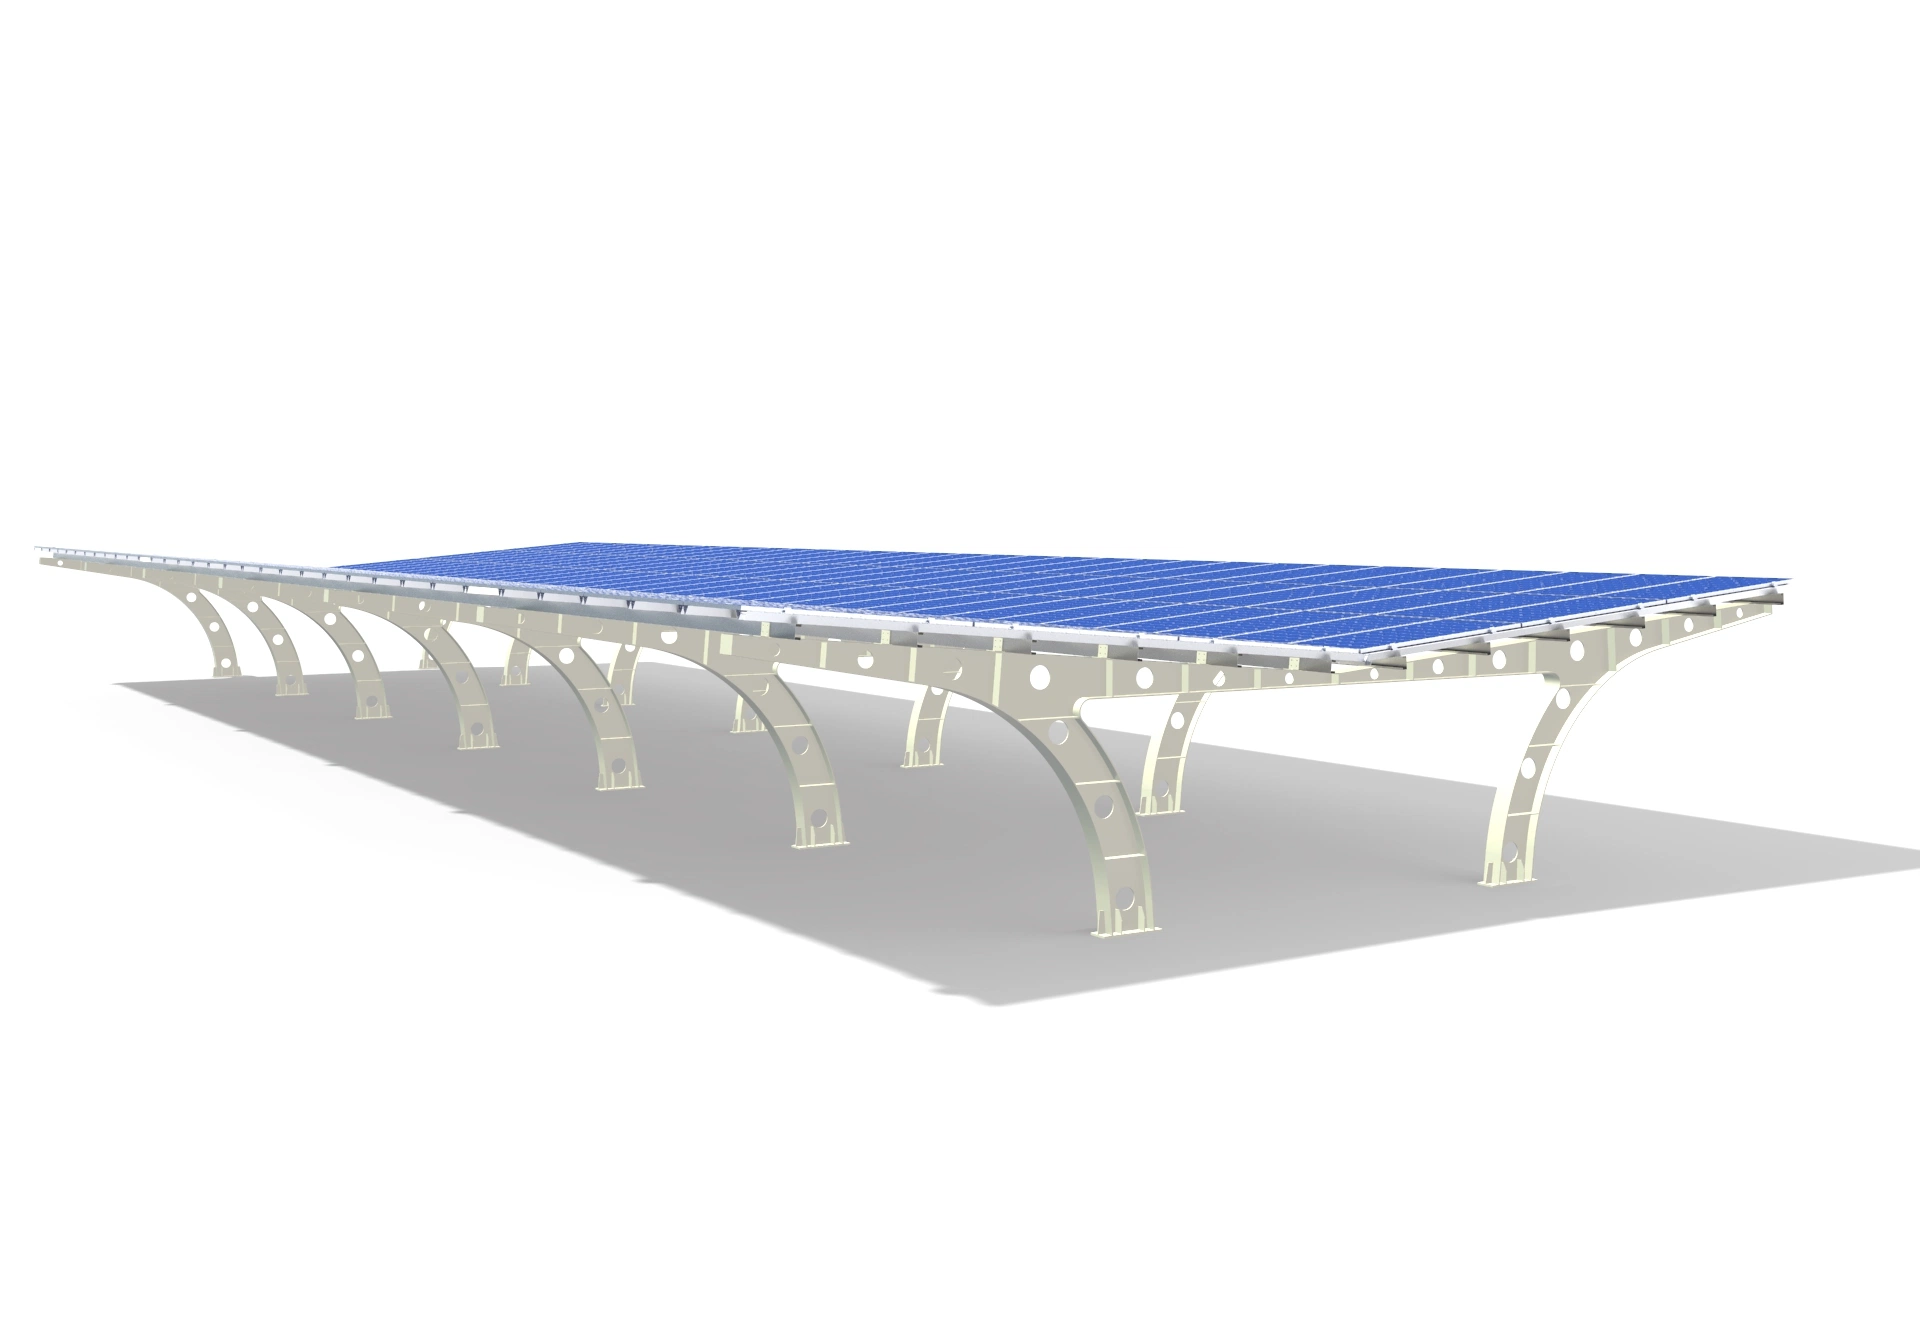 Solar Car Park for Industry and Commerce